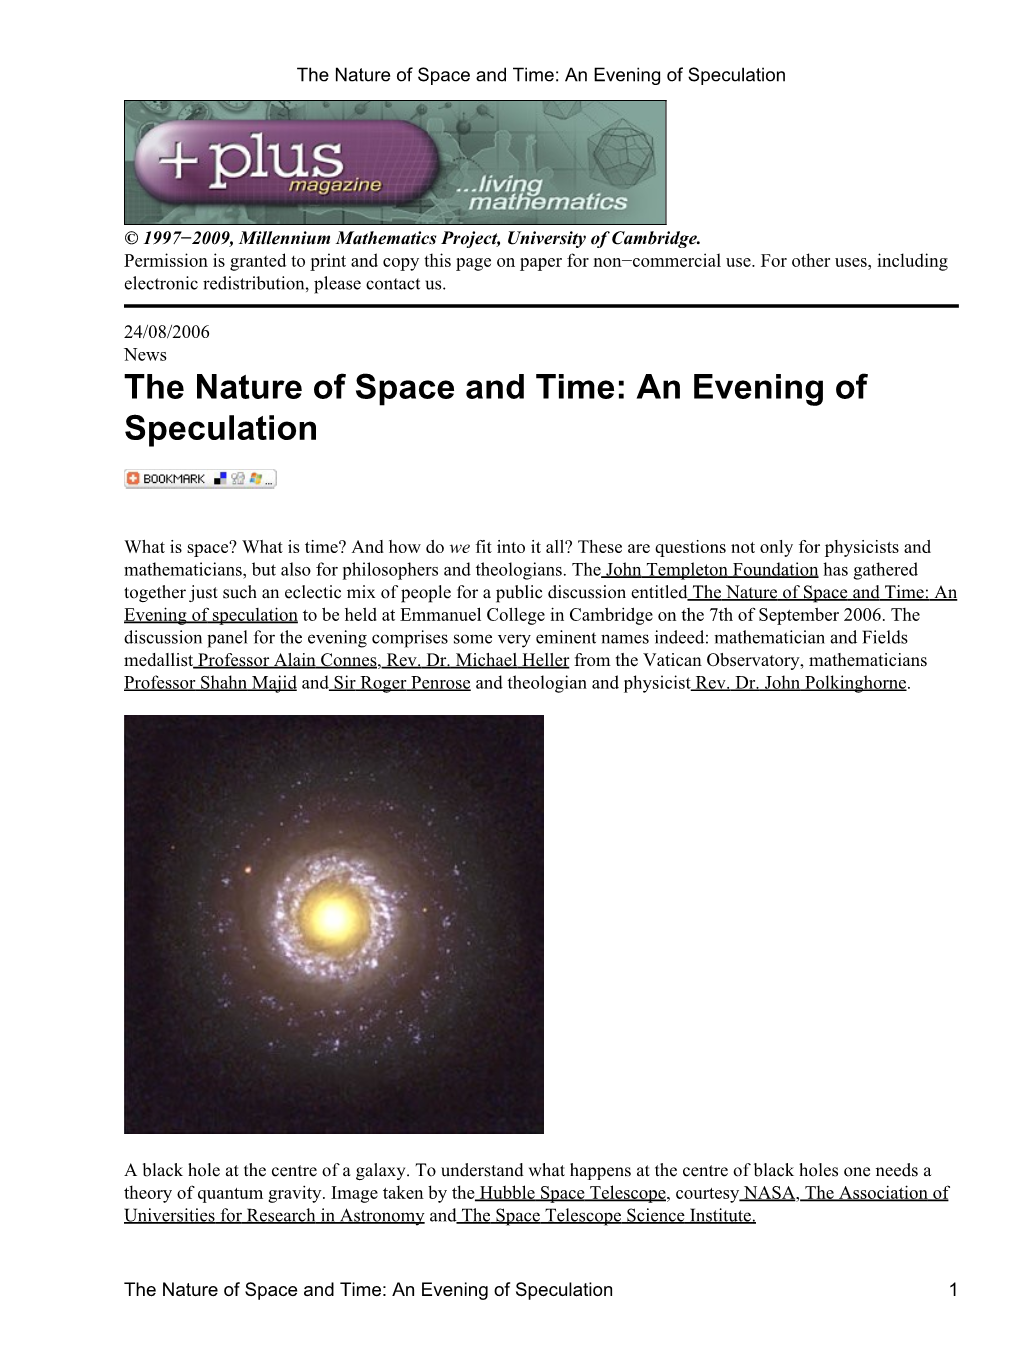 The Nature of Space and Time: an Evening of Speculation